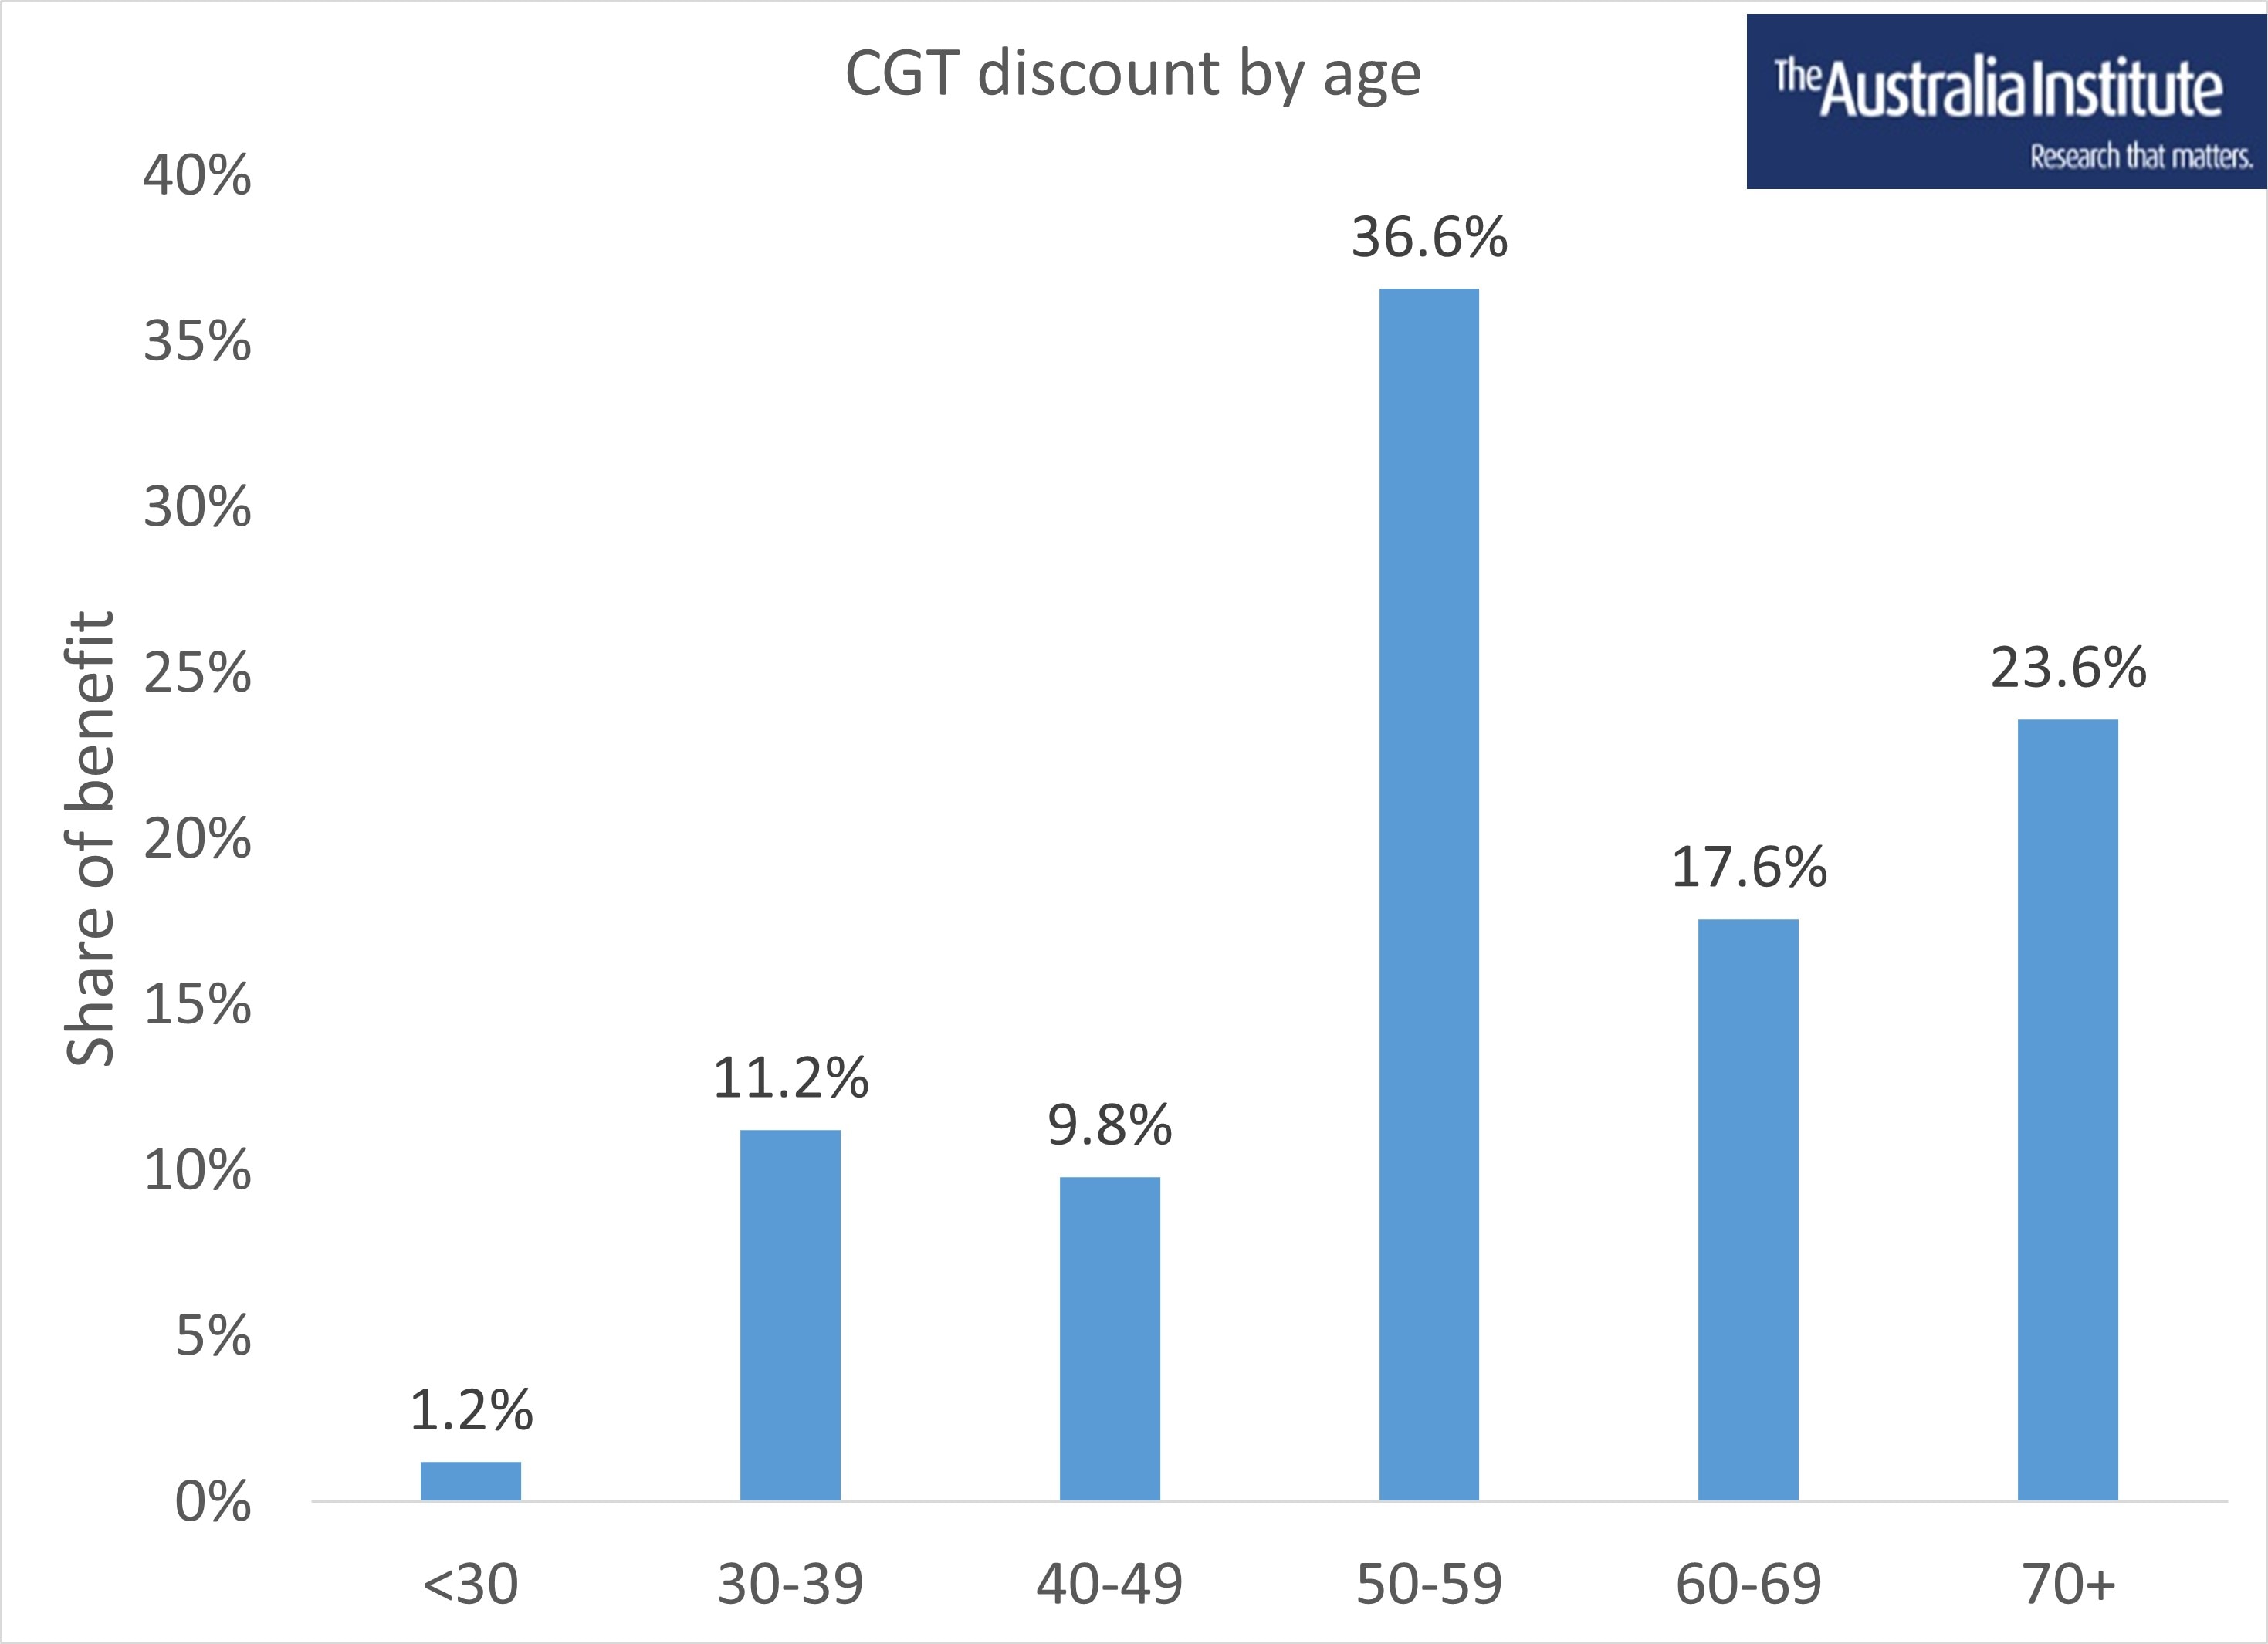 CGT discount by age (002)